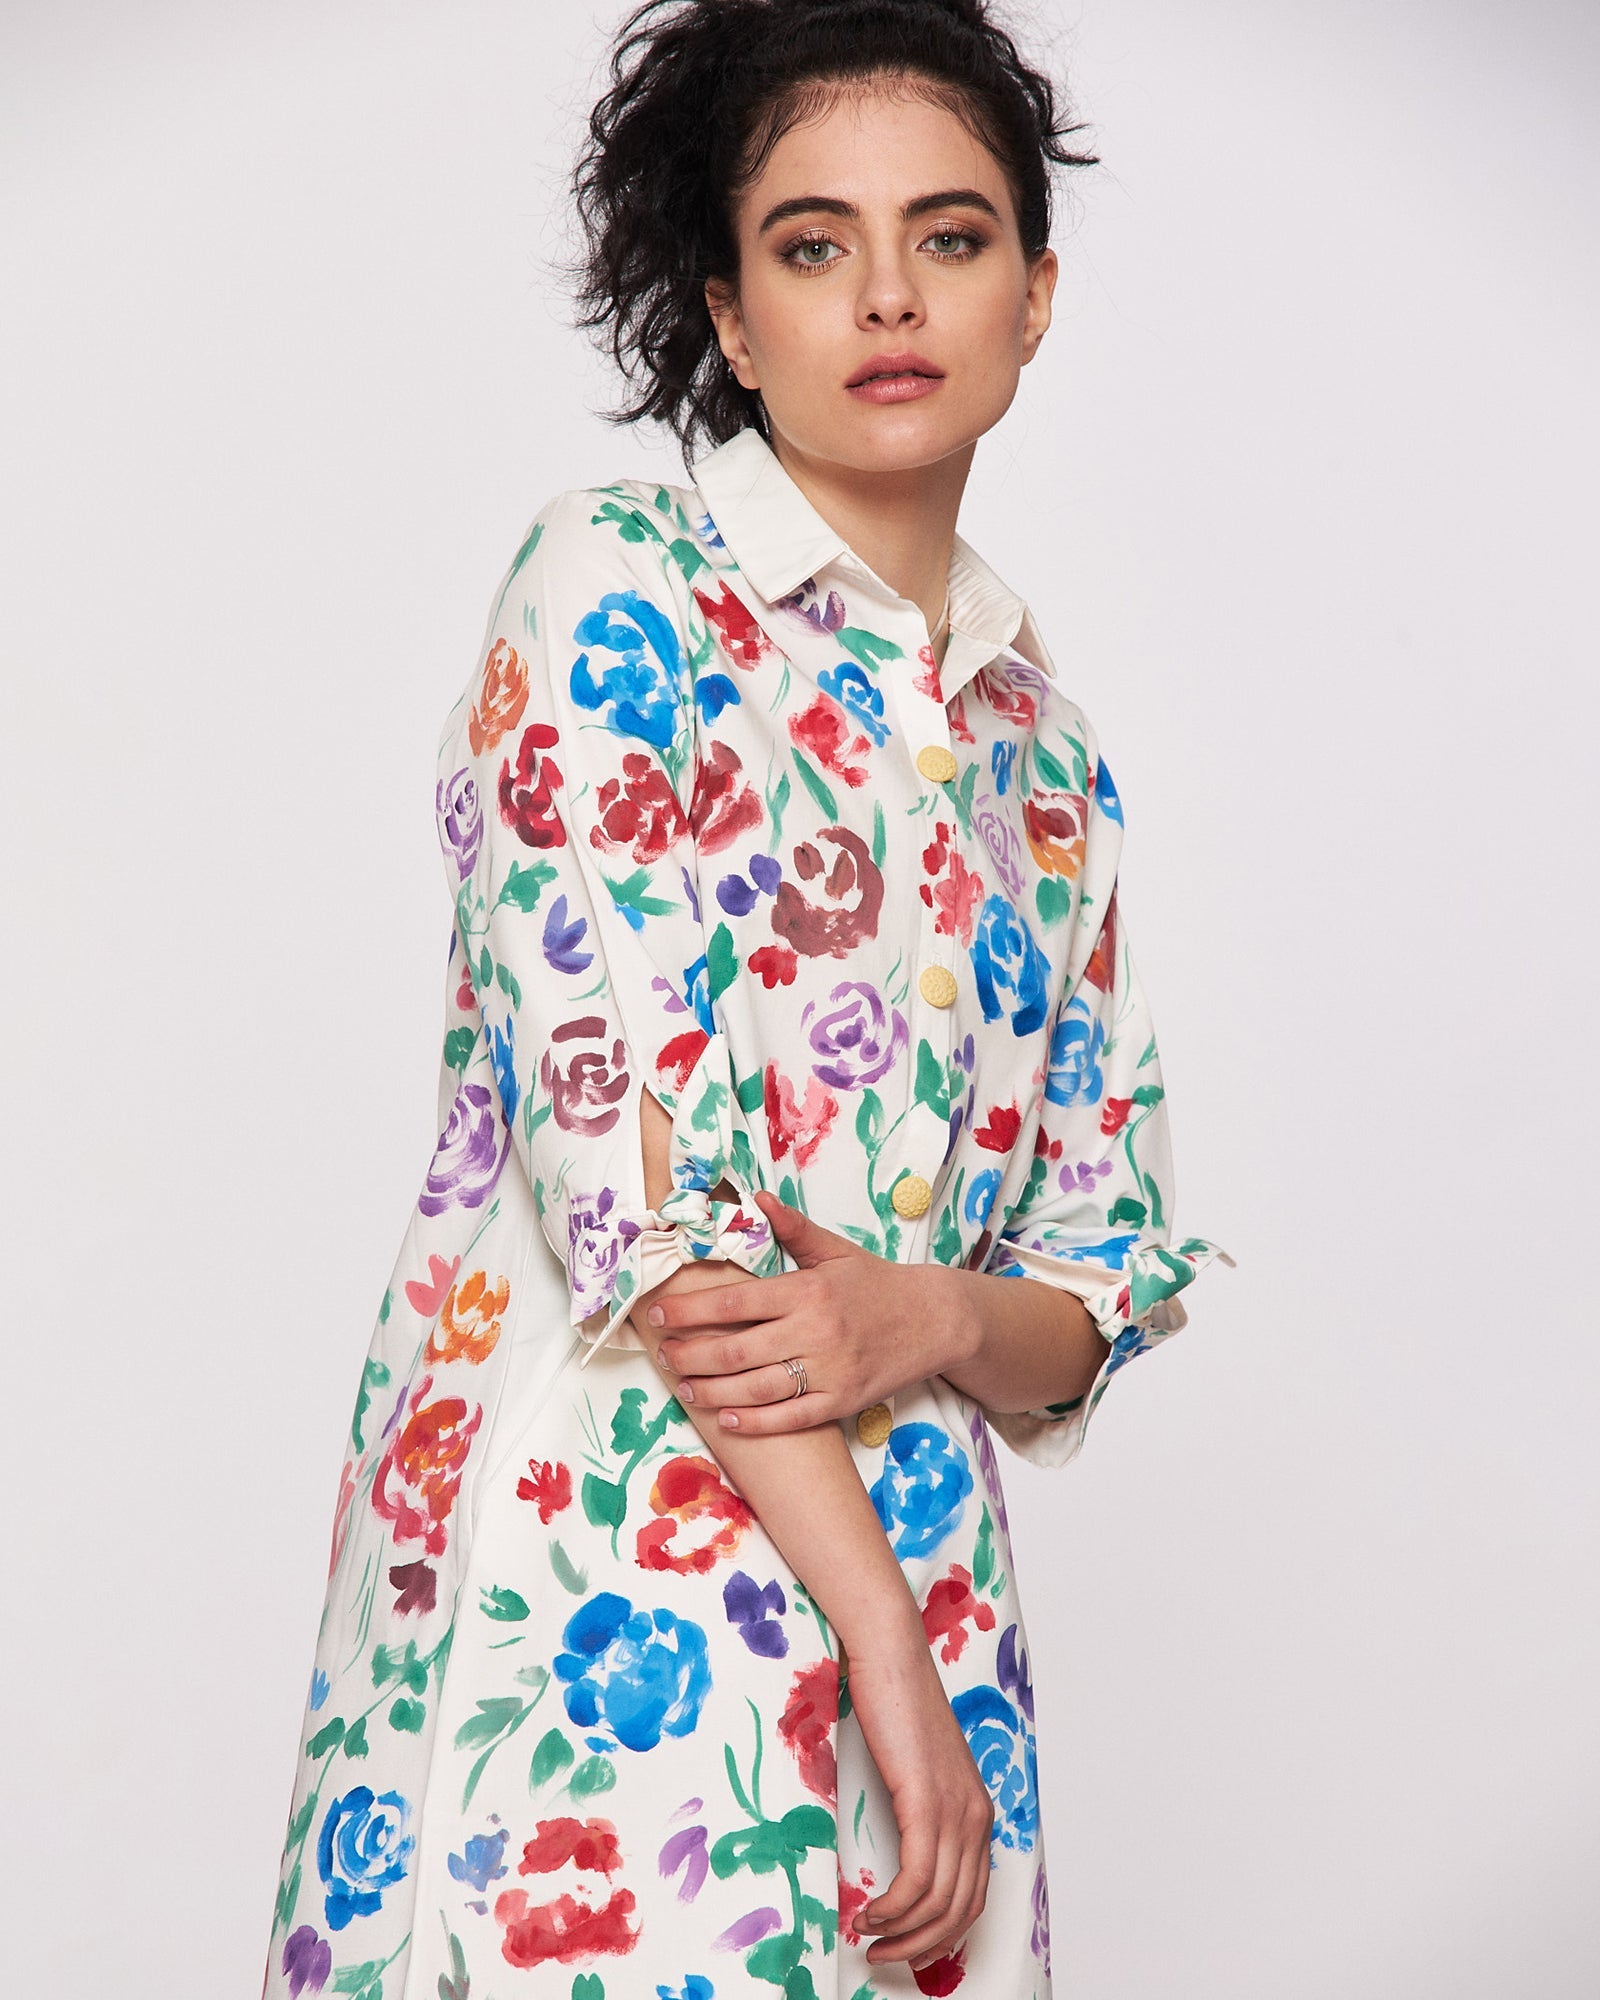 Women's tunic dress with floral motif "Language of flowers"